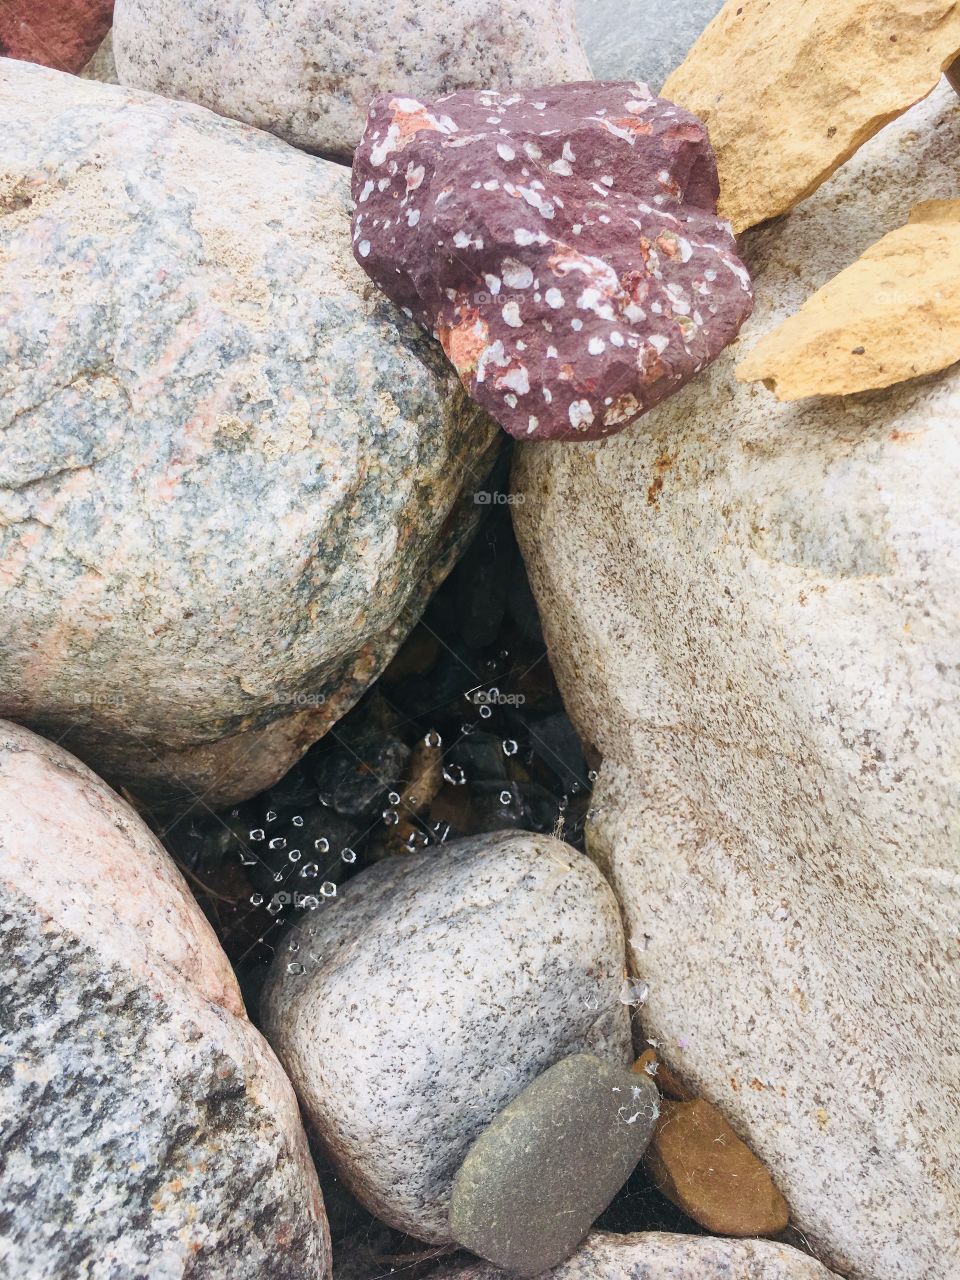 Rocks and water droplets on a spider web